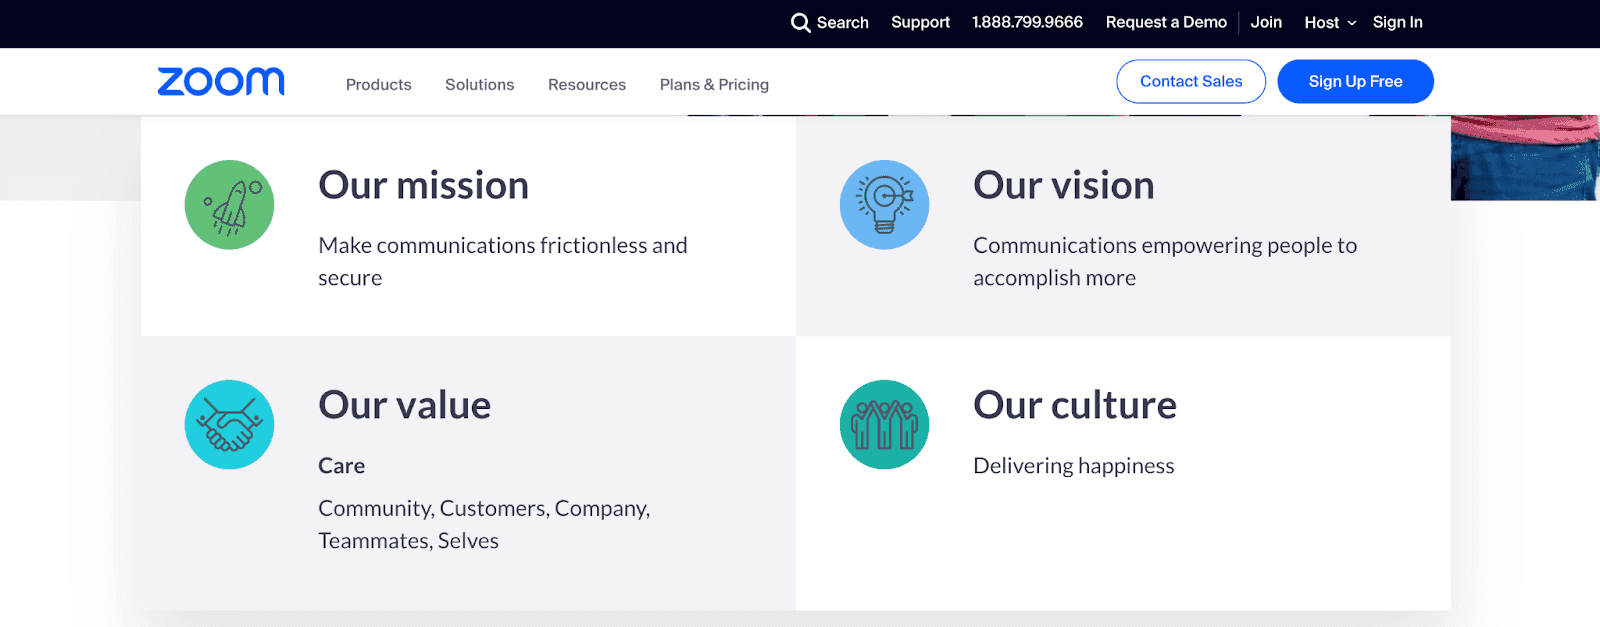 The values of Zoom including their mission, vision, value and culture.